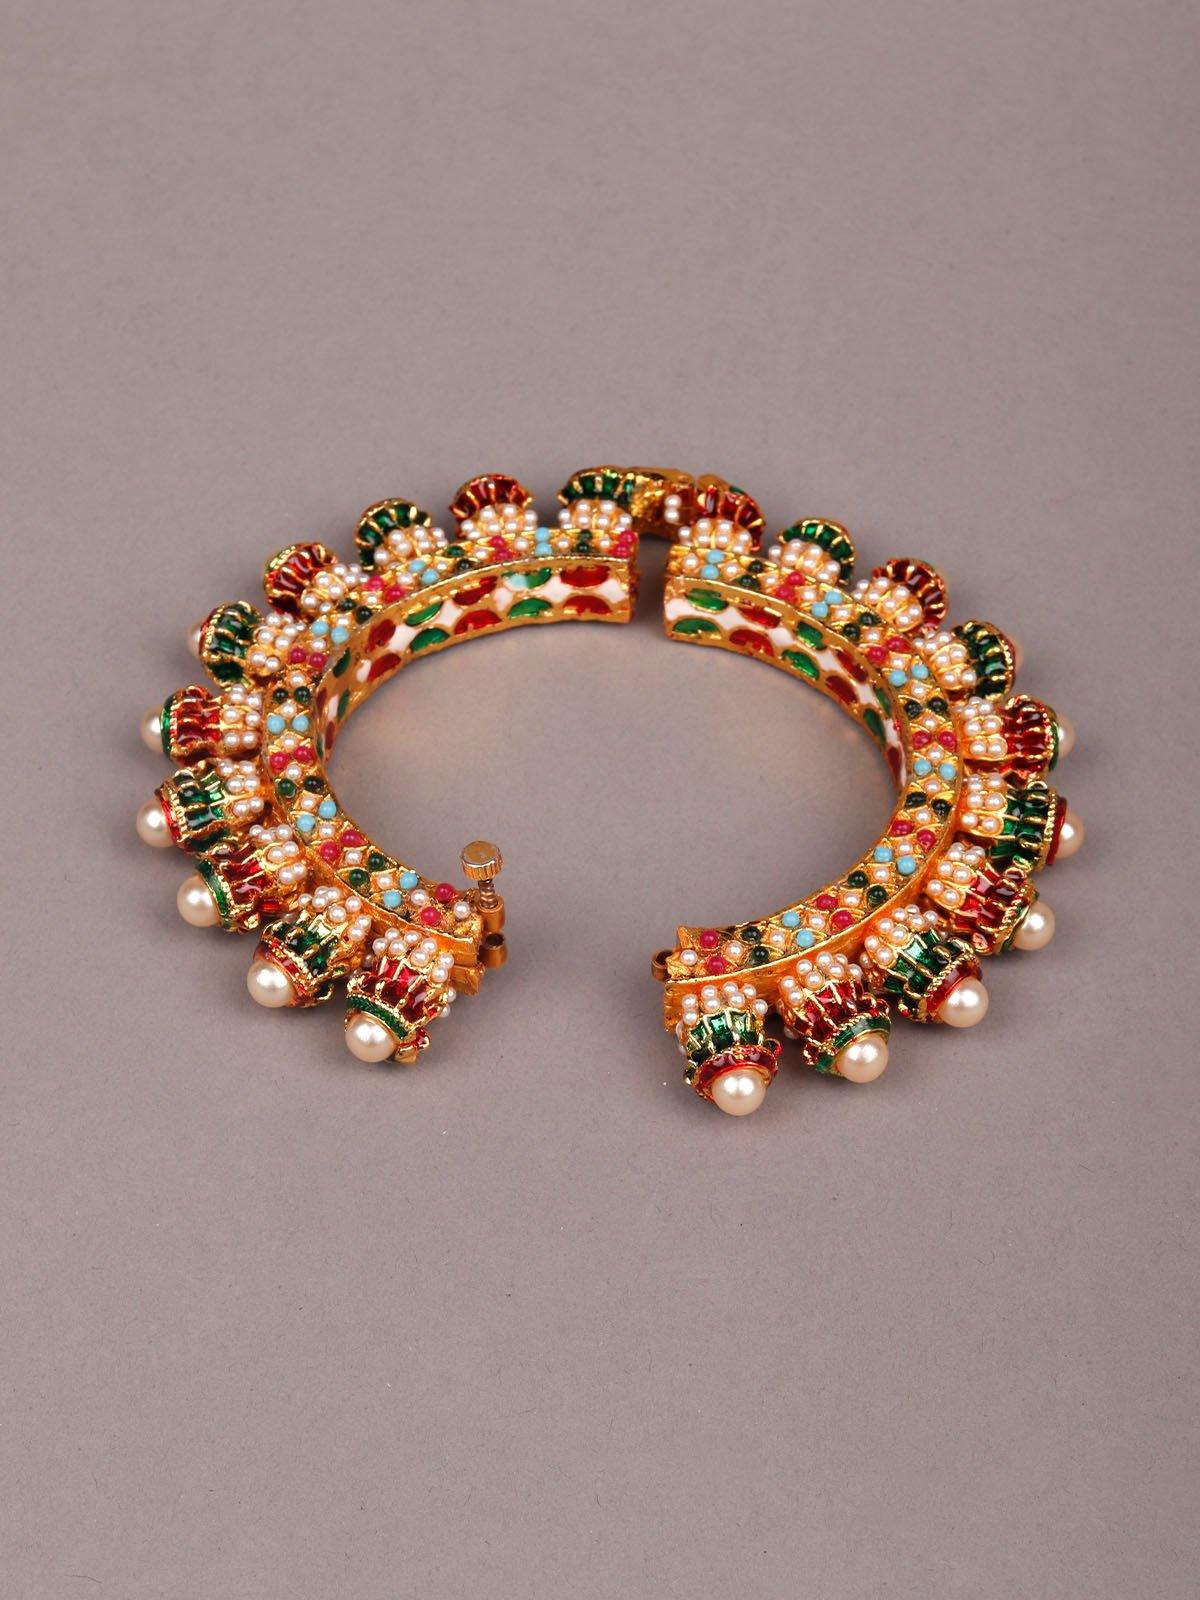 Women's Studded Red & Green Gold-Tone Bangle - Odette